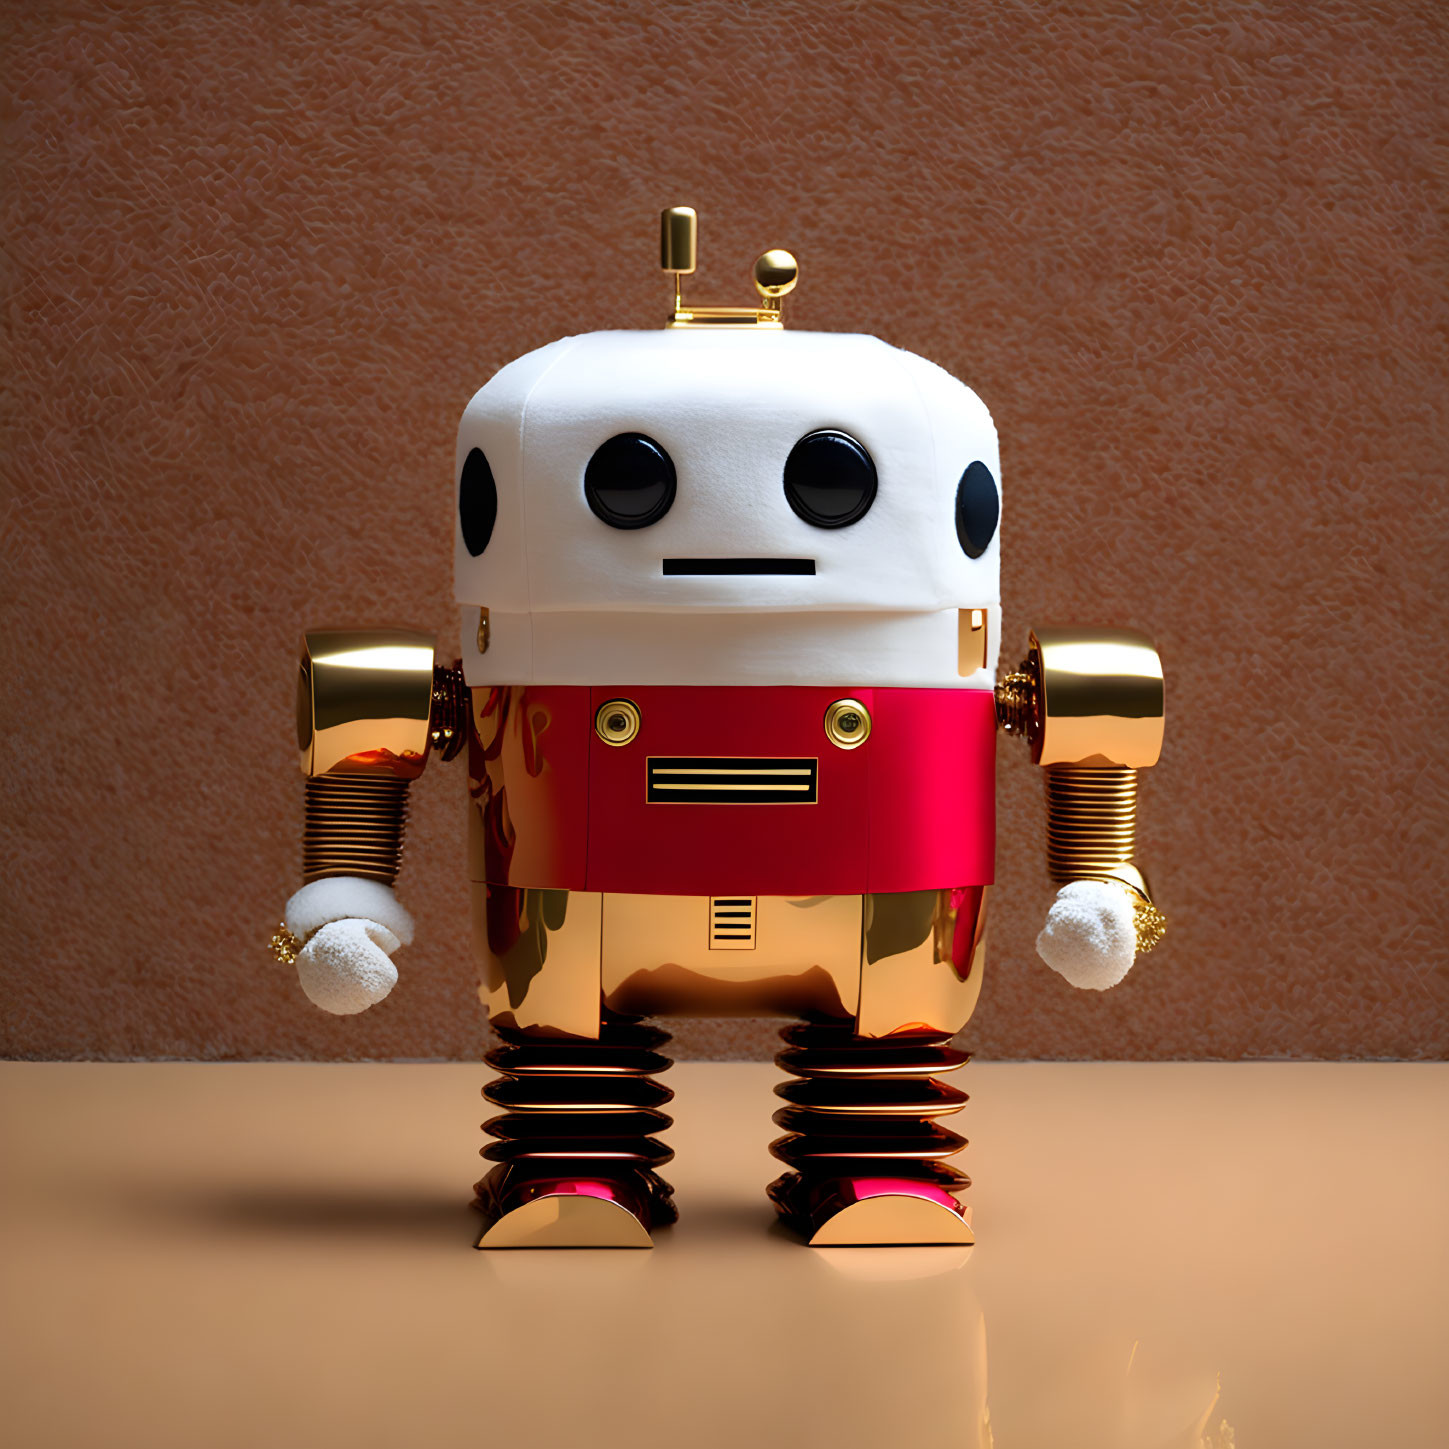 Shiny robot with white head and golden accents on spring legs